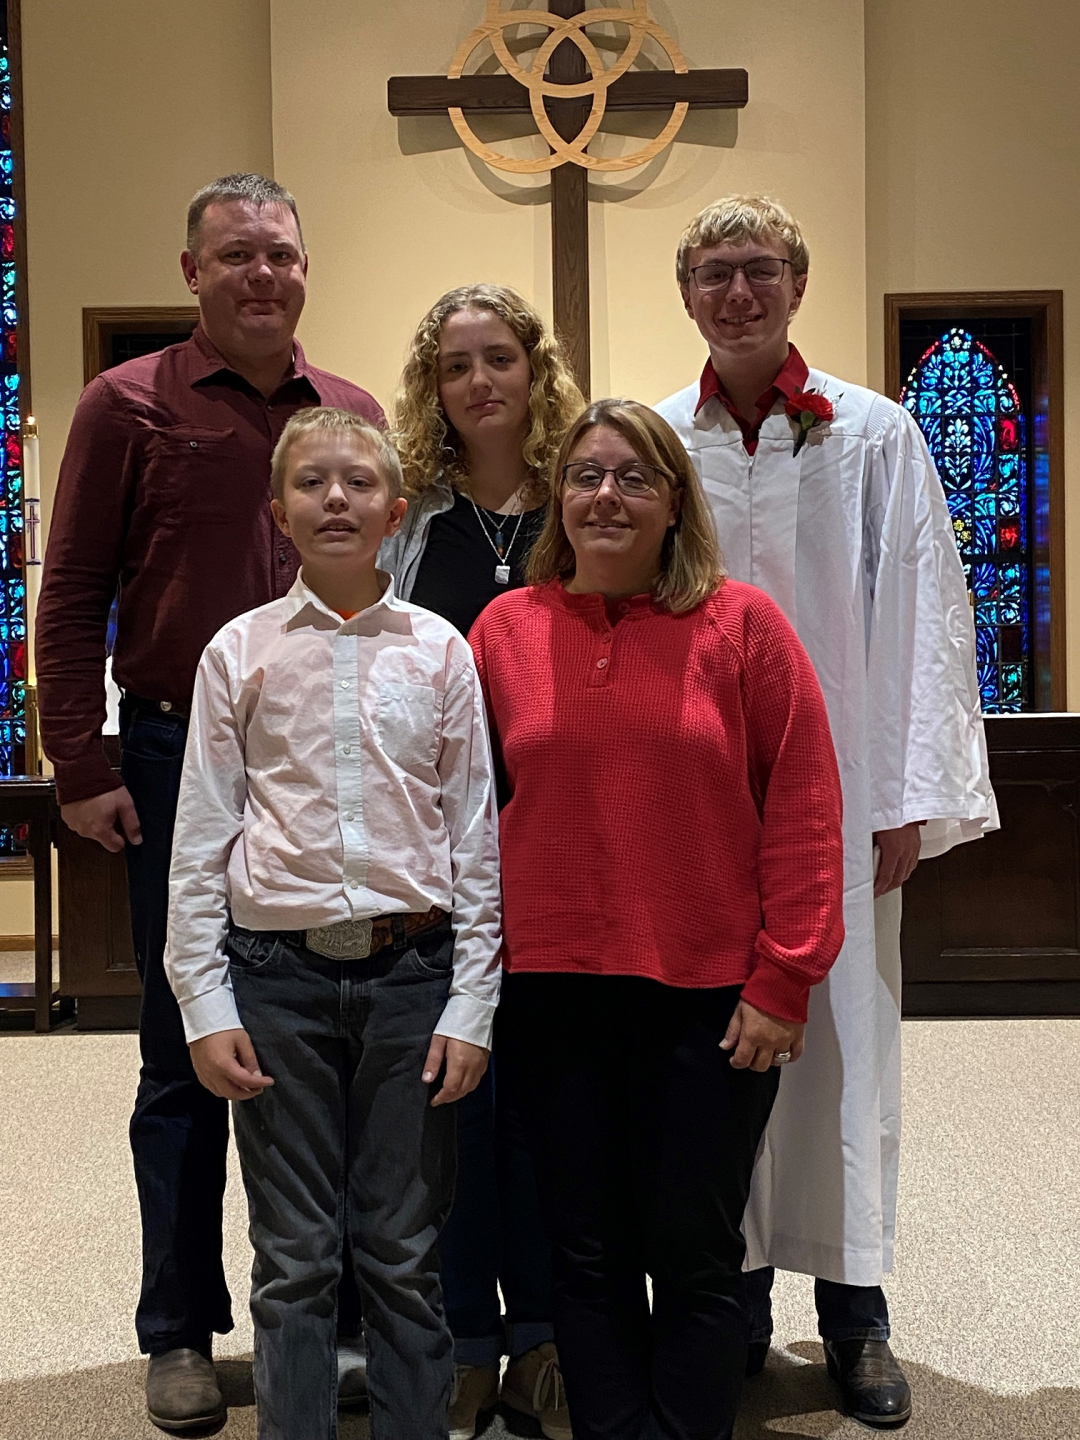 A picture of Erin with her husband and three children in church together with a wood cross behind them.